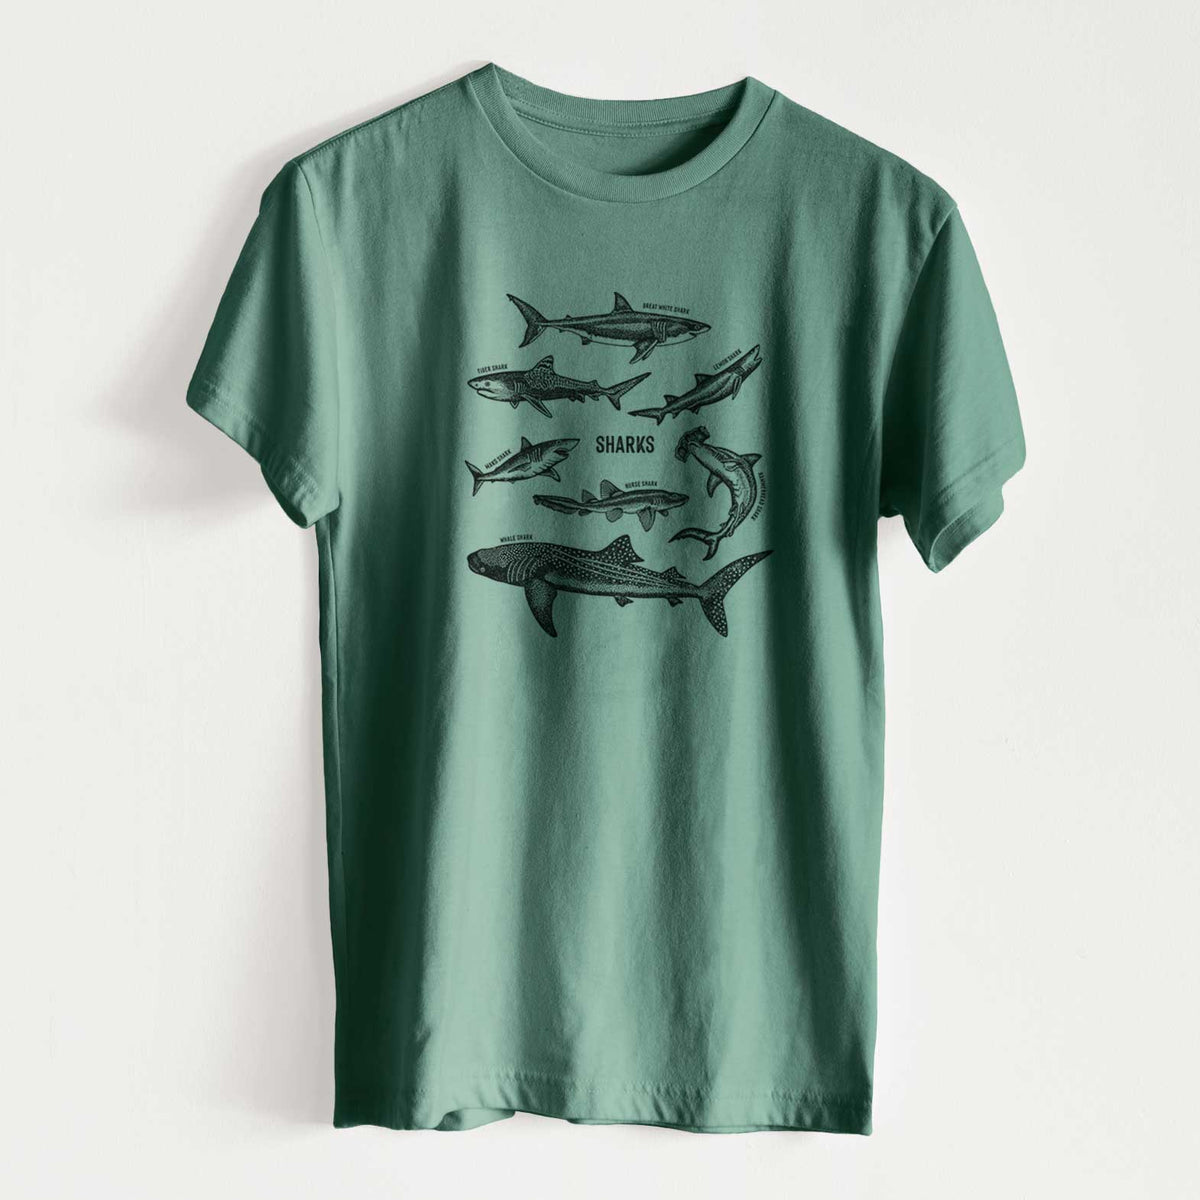 Shark Chart - Unisex Recycled Eco Tee  - CLOSEOUT - FINAL SALE